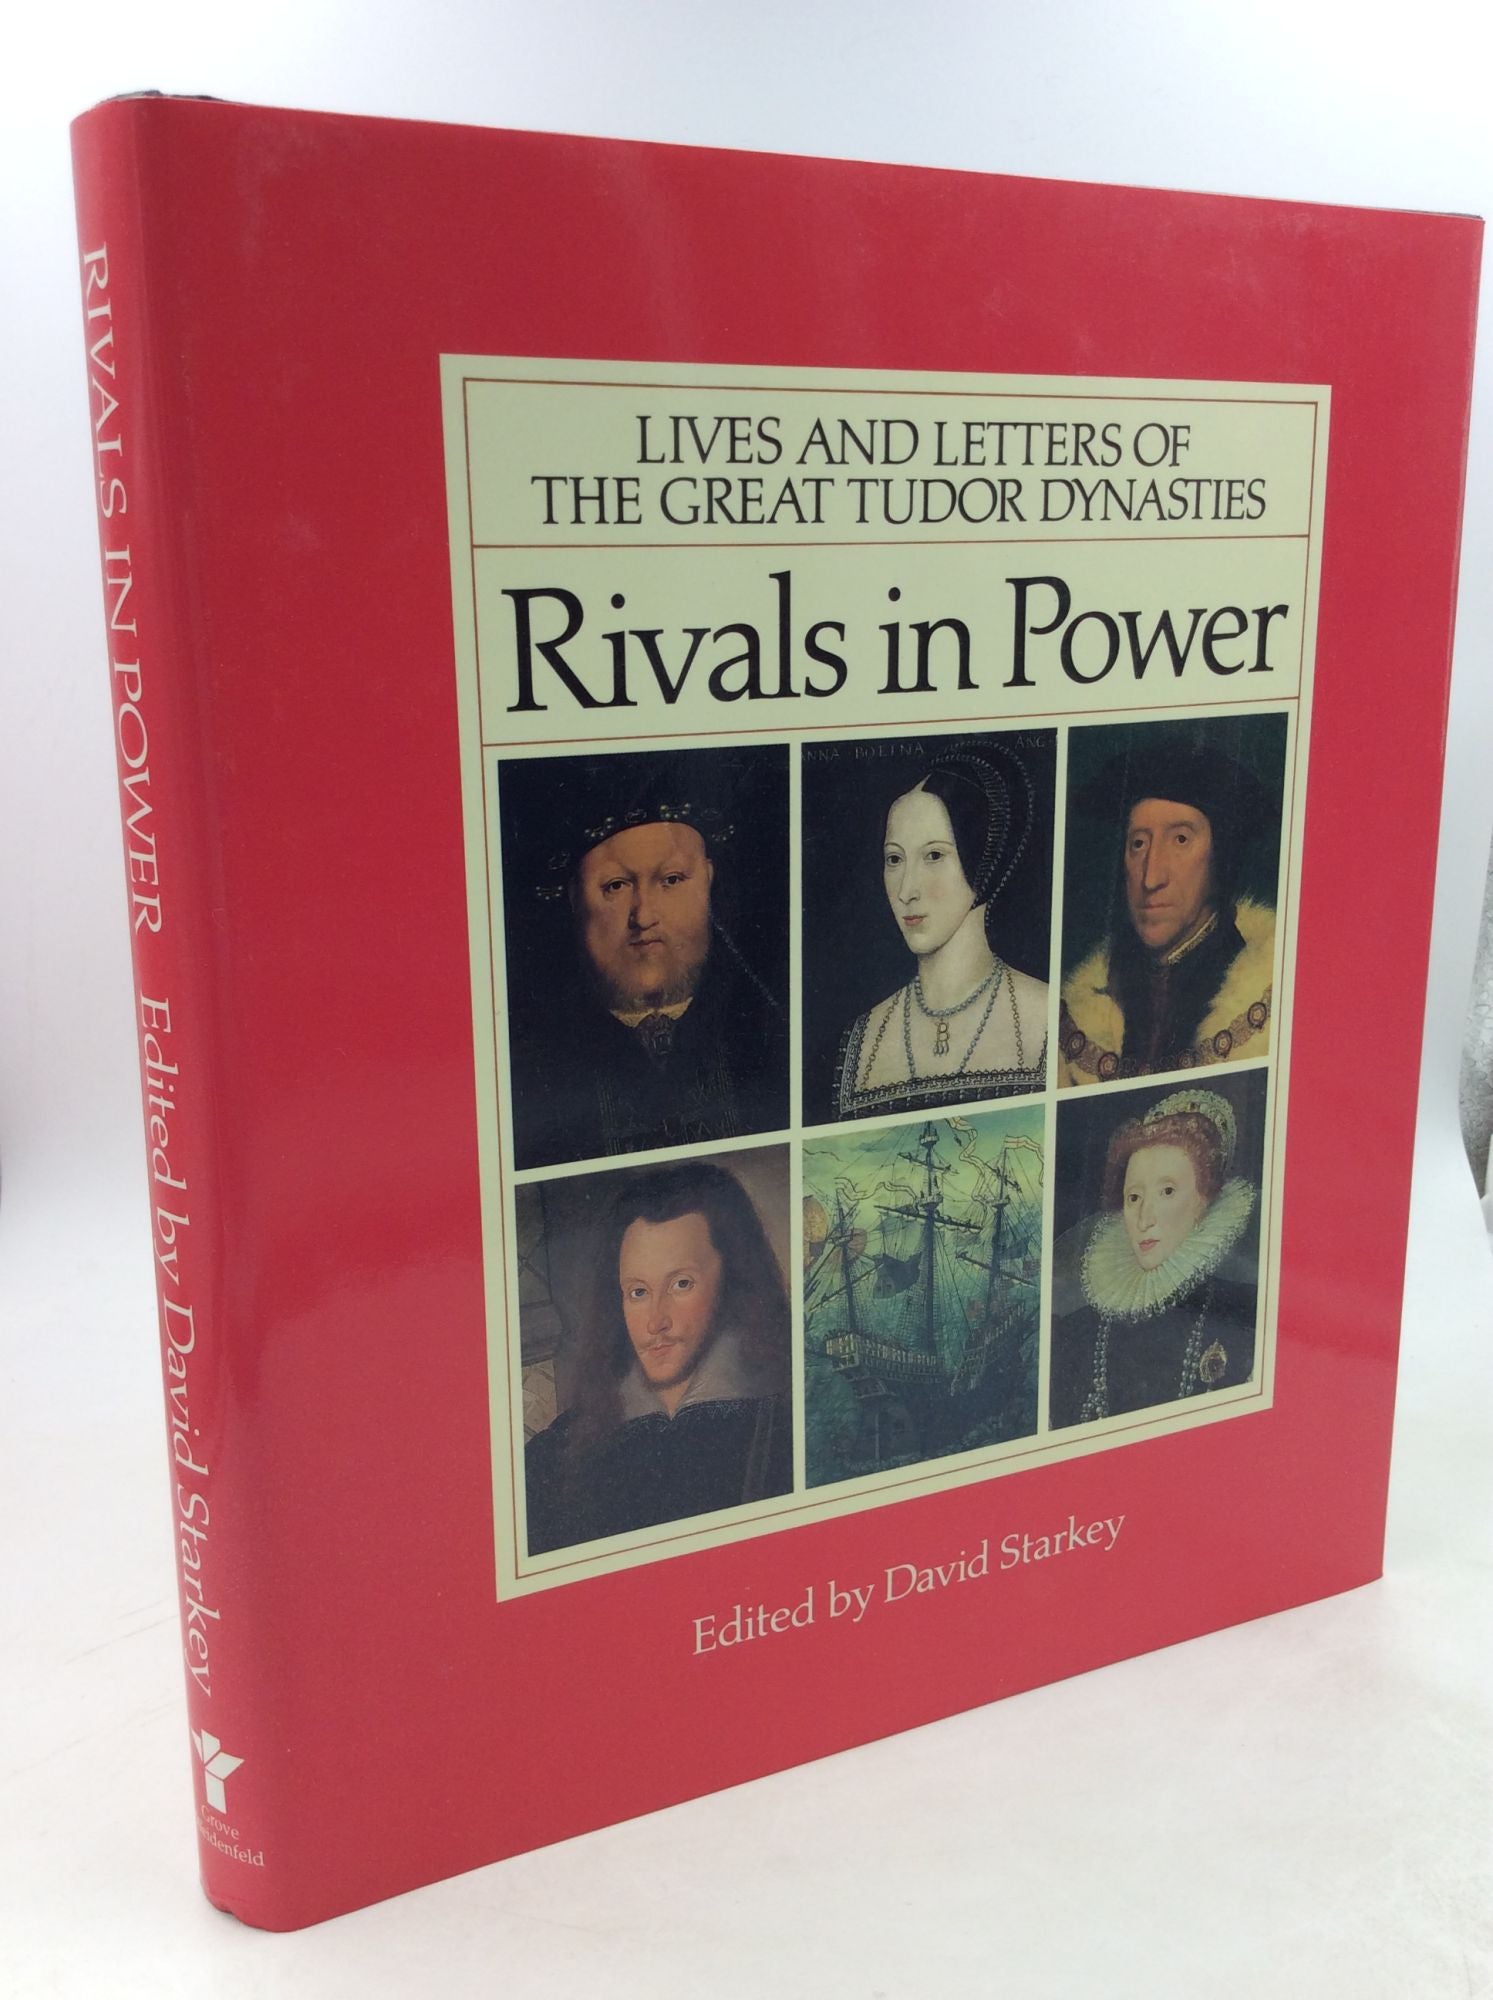 David Starkey, ed - Rivals in Power: Lives and Letters of the Great Tudor Dynasties